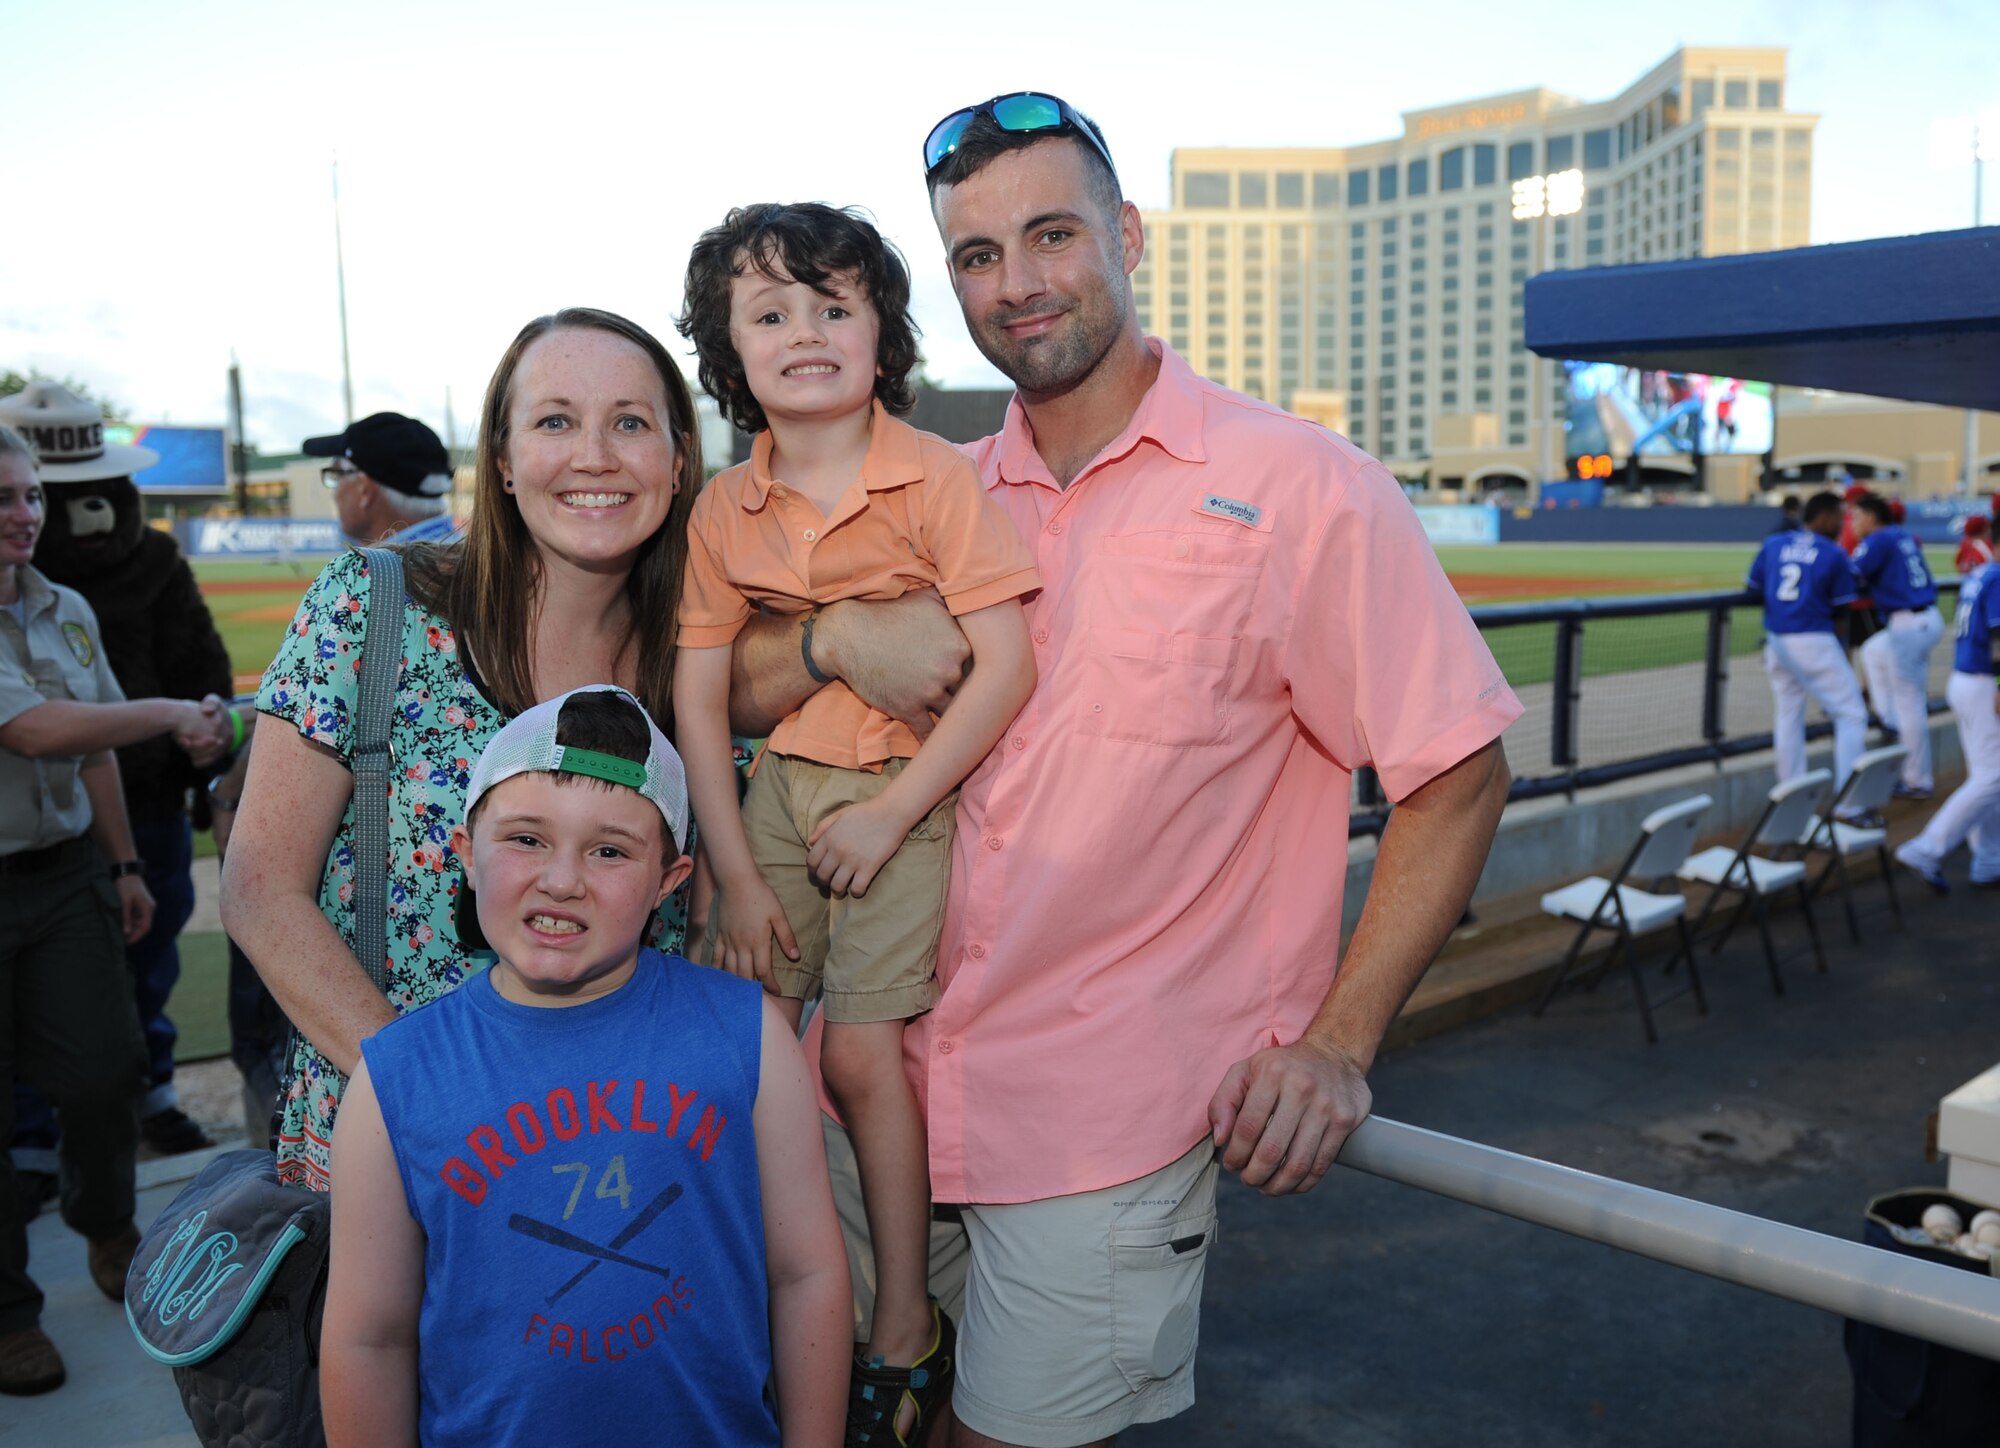 Staff Sgt. Jonathan McMillan, 81st Diagnostic and Therapeutics Squadron cat scan NCOIC, poses for a photo with his wife, Katie, son, Weston, and his nephew, Brandon Lakes, during a Biloxi Shuckers Minor League Baseball game Aug. 15, 2015, at MGM Park, Biloxi, Miss. Weston threw an opening pitch prior to the start of the game. (U.S. Air Force photo by Kemberly Groue)